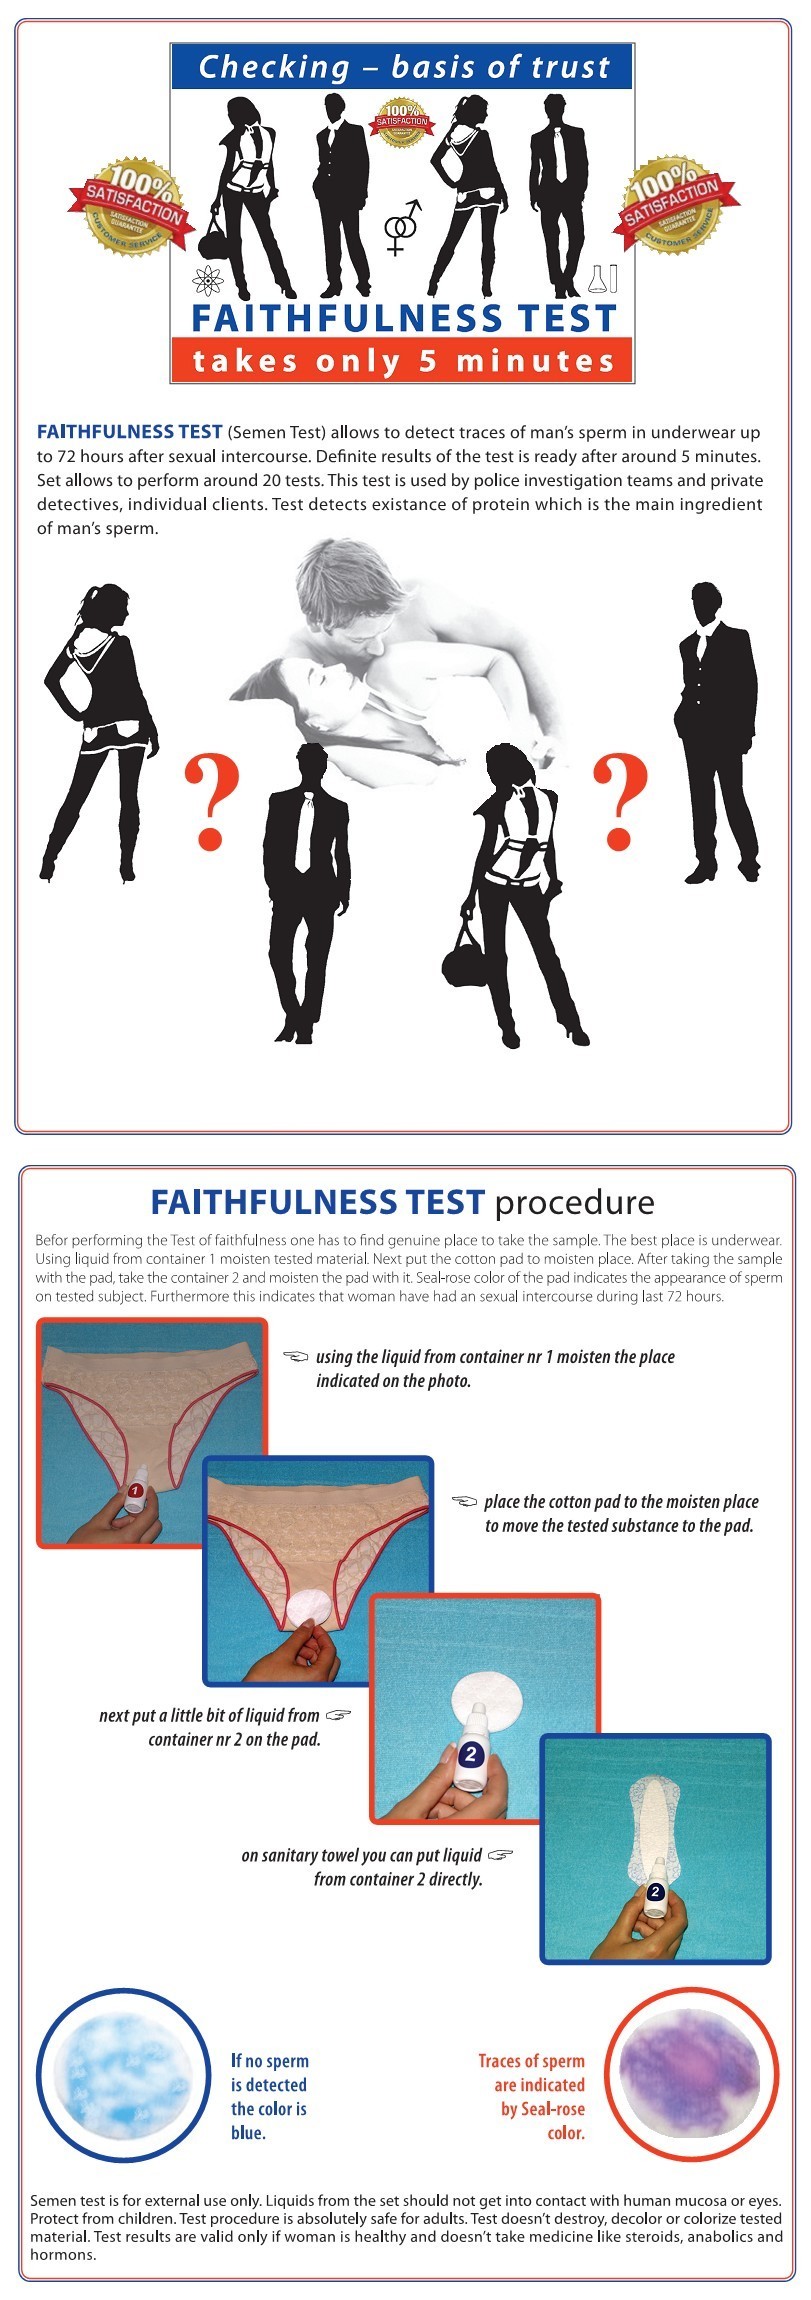 test underwear spouse in Free cheating for sperm